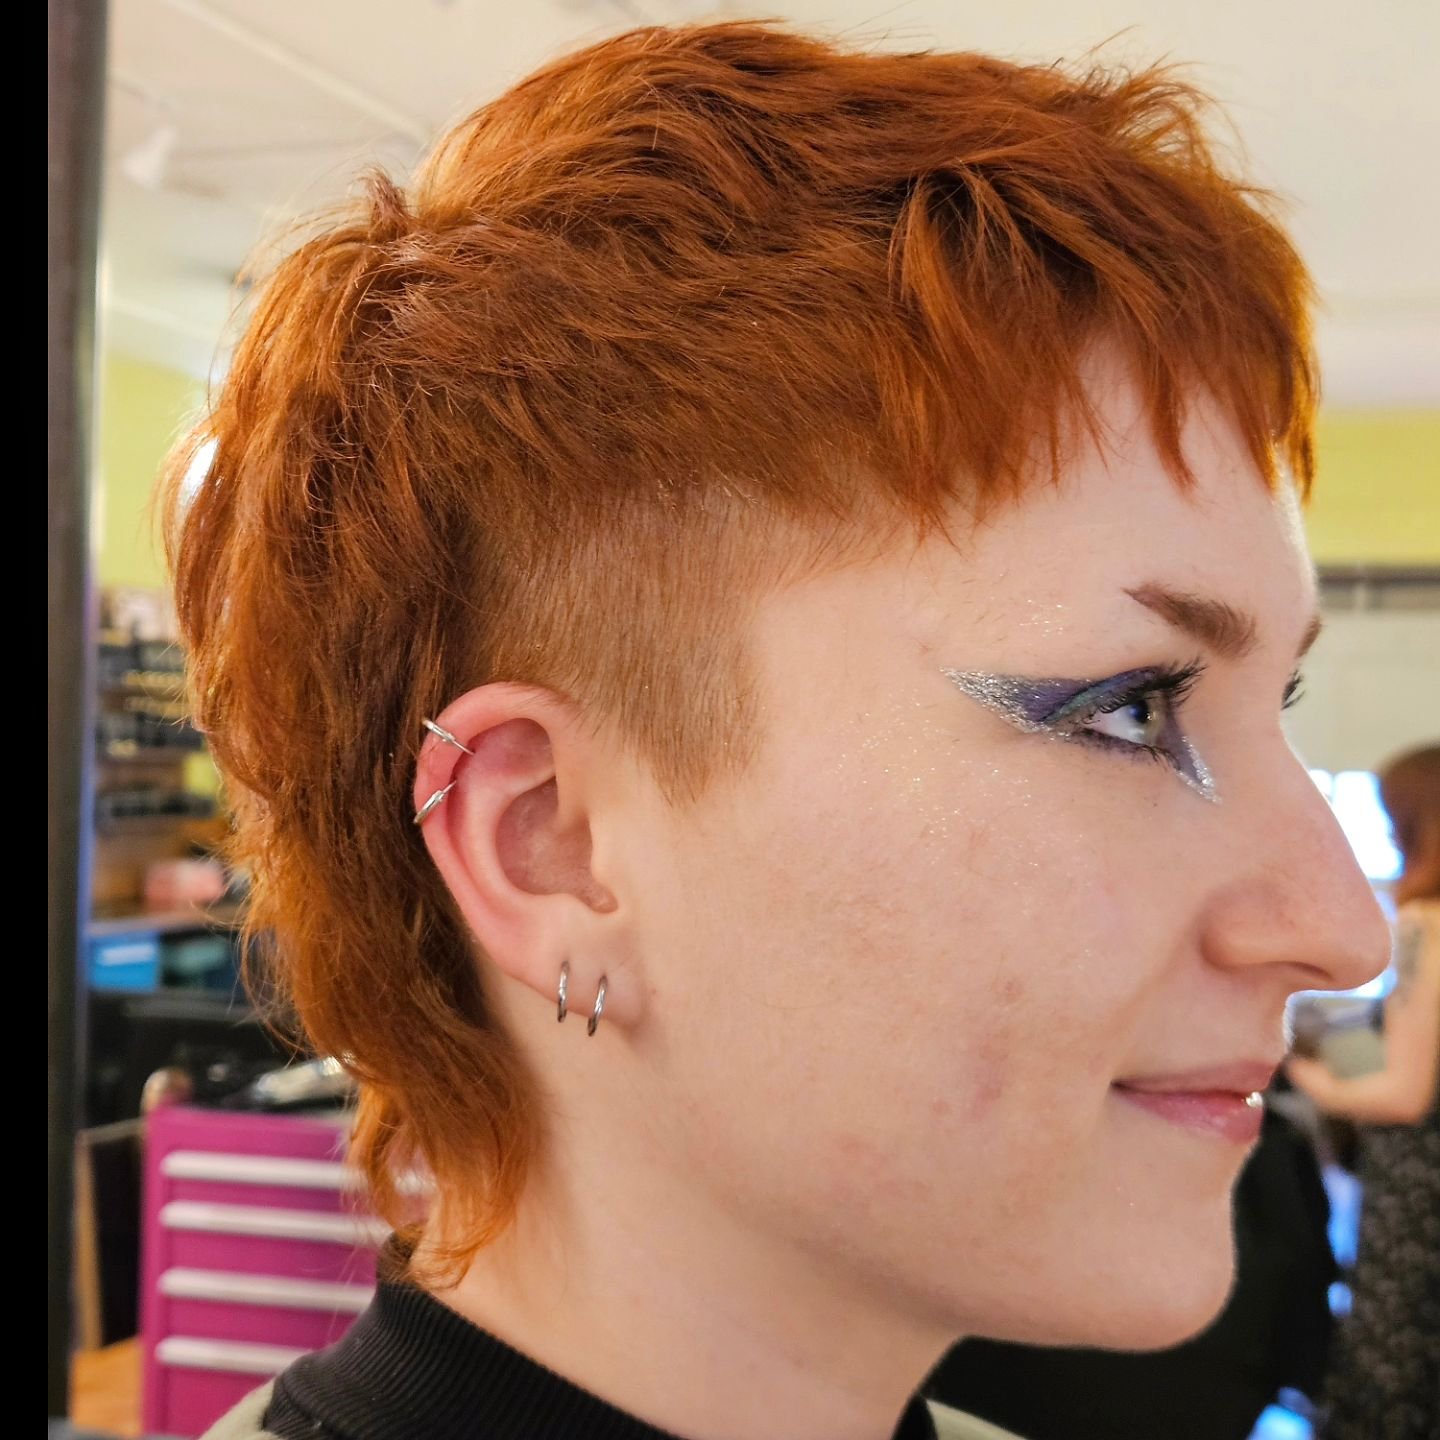 Maggie's (they/them) baby mullet with the cute wispy pieces needed another post ✂️ 

#lexingtonkysalon #lgbtqhairstylist #lexingtonkyhairstylist #mullet #babymullet #piecybangs